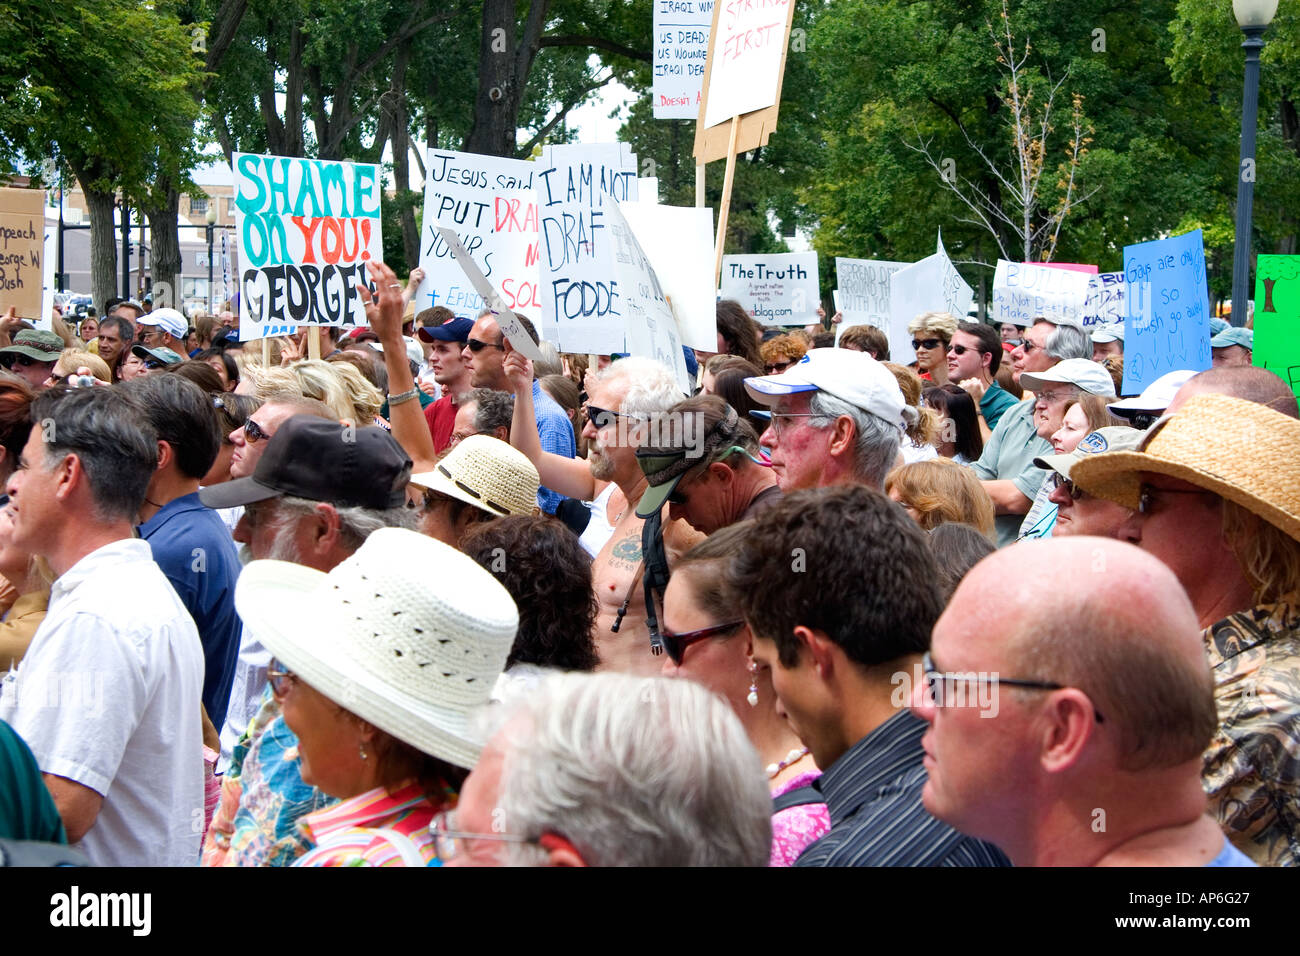 A crowd holding signs at an Anti war protest in Salt Lake City Utah 8 22 2005 Stock Photo